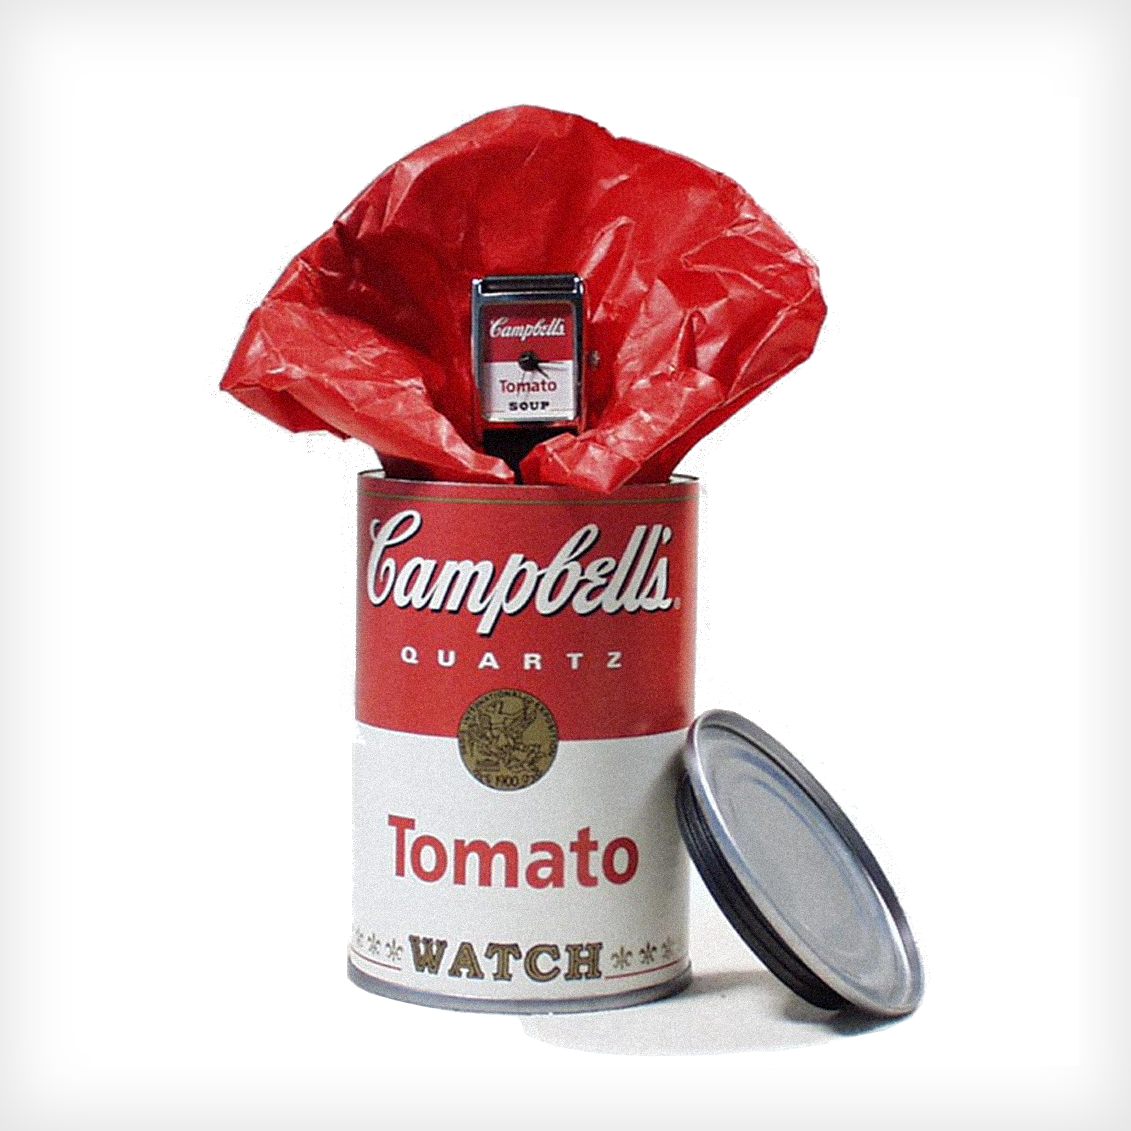 "Campbell's Watch Can" Packaging